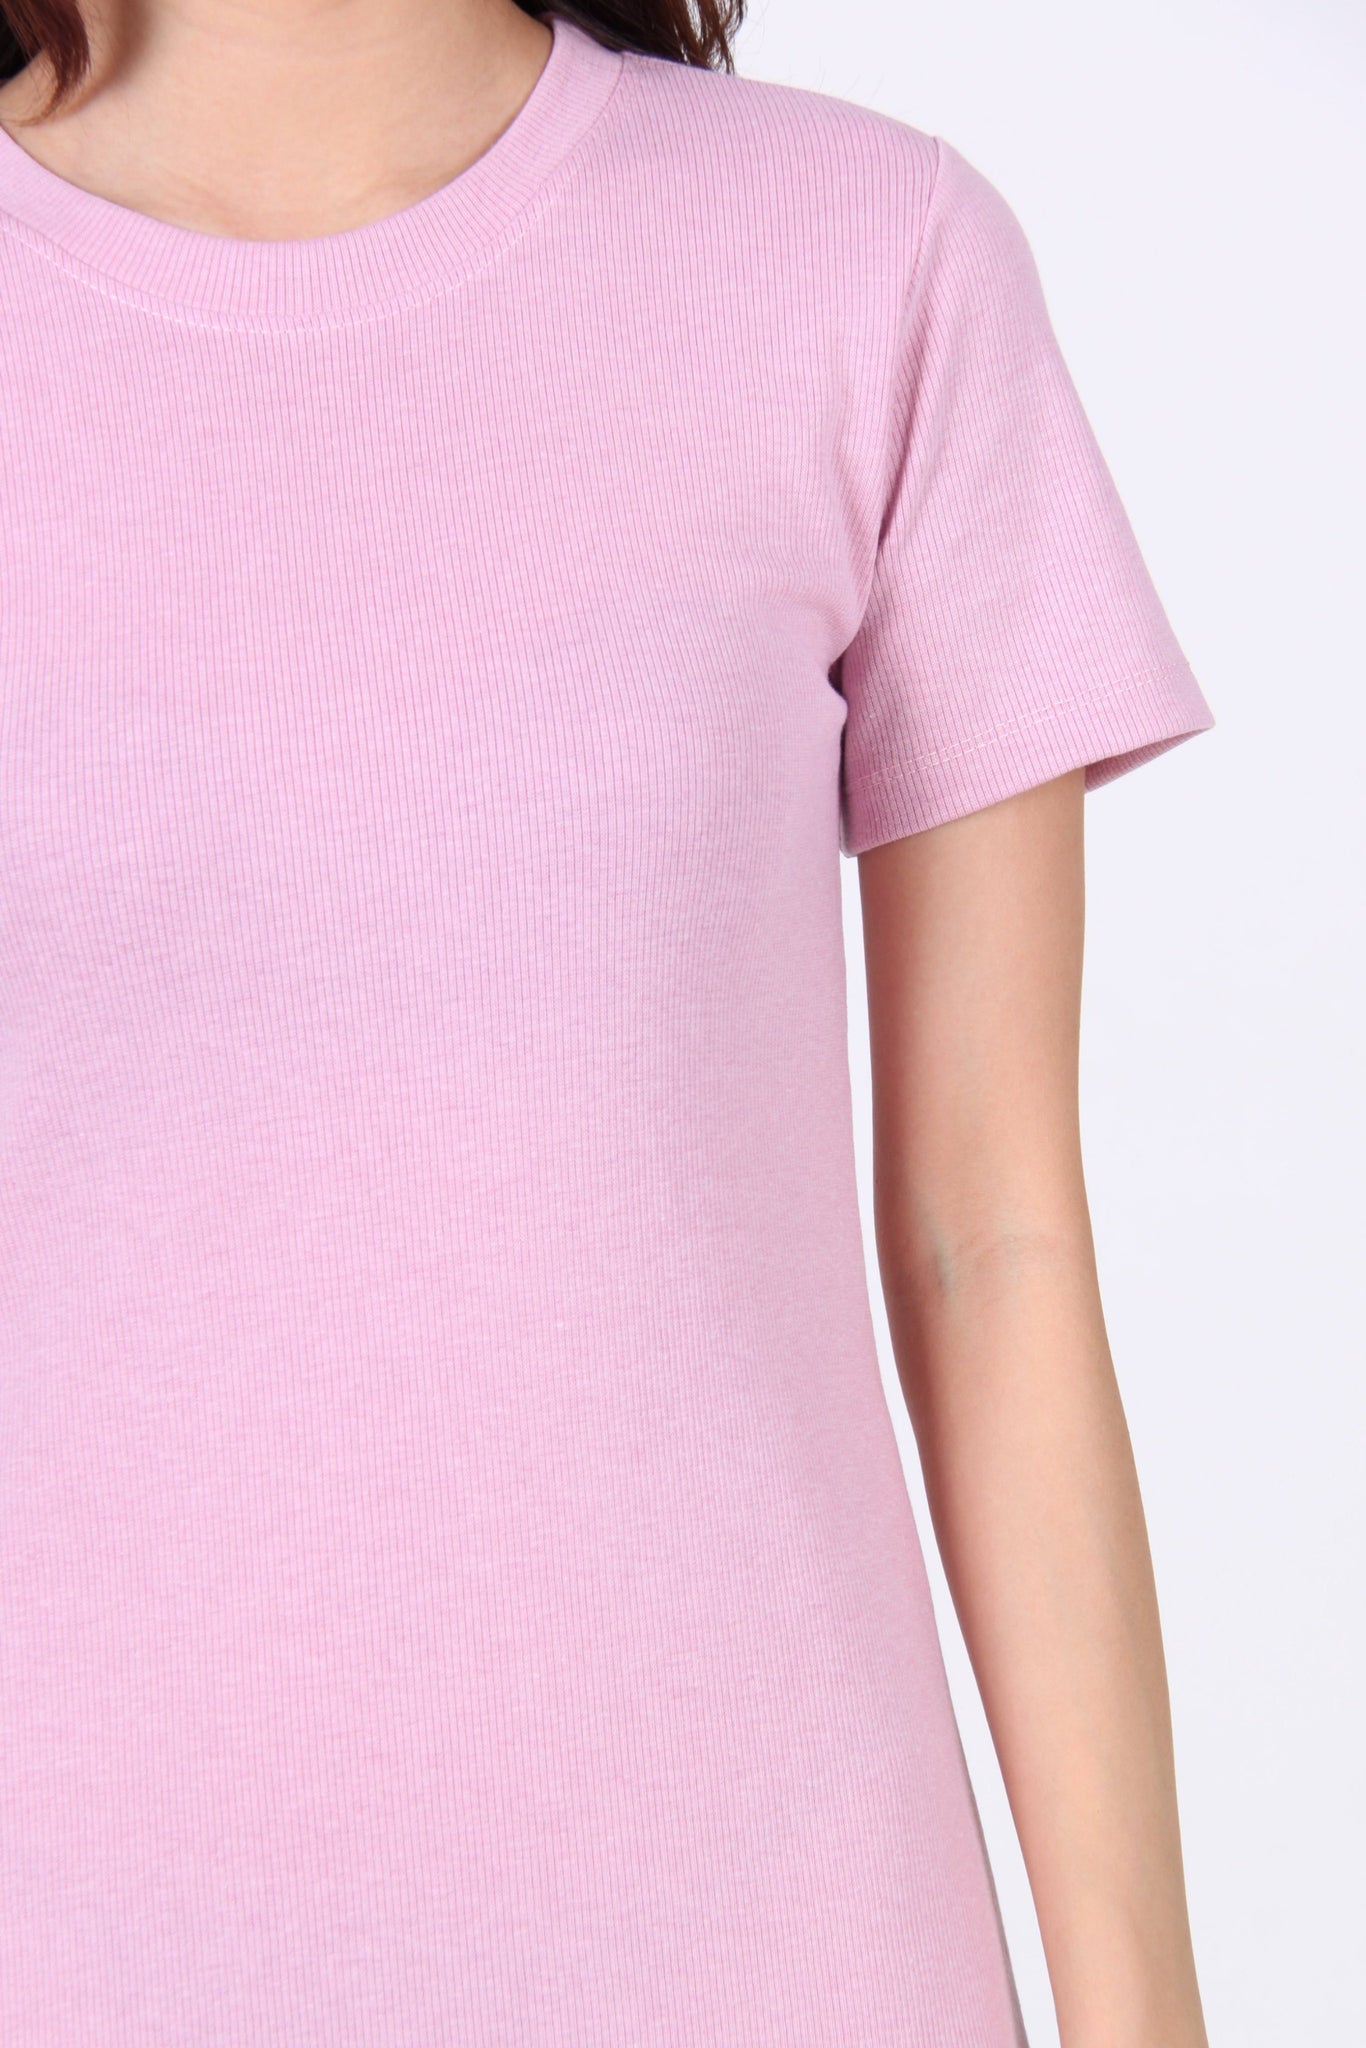 Basic Everyday Comfy Tee Dress in Pink